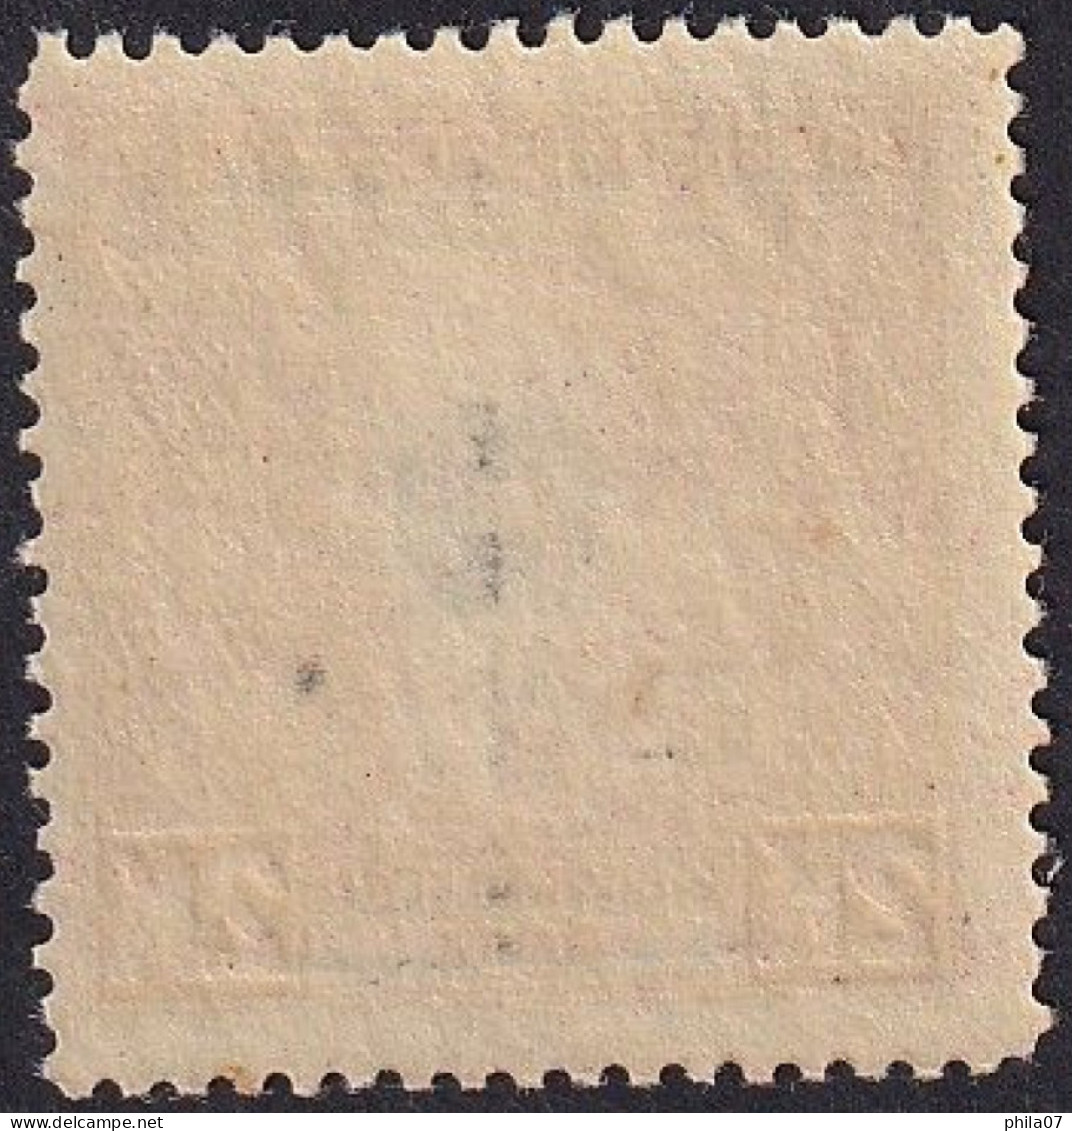 BOSNIA AND HERZEGOVINA - Trial Overprint From Series Mi.No. 33/50 On Stamp With Image Of Karlo / 2 Scan - Bosnia And Herzegovina